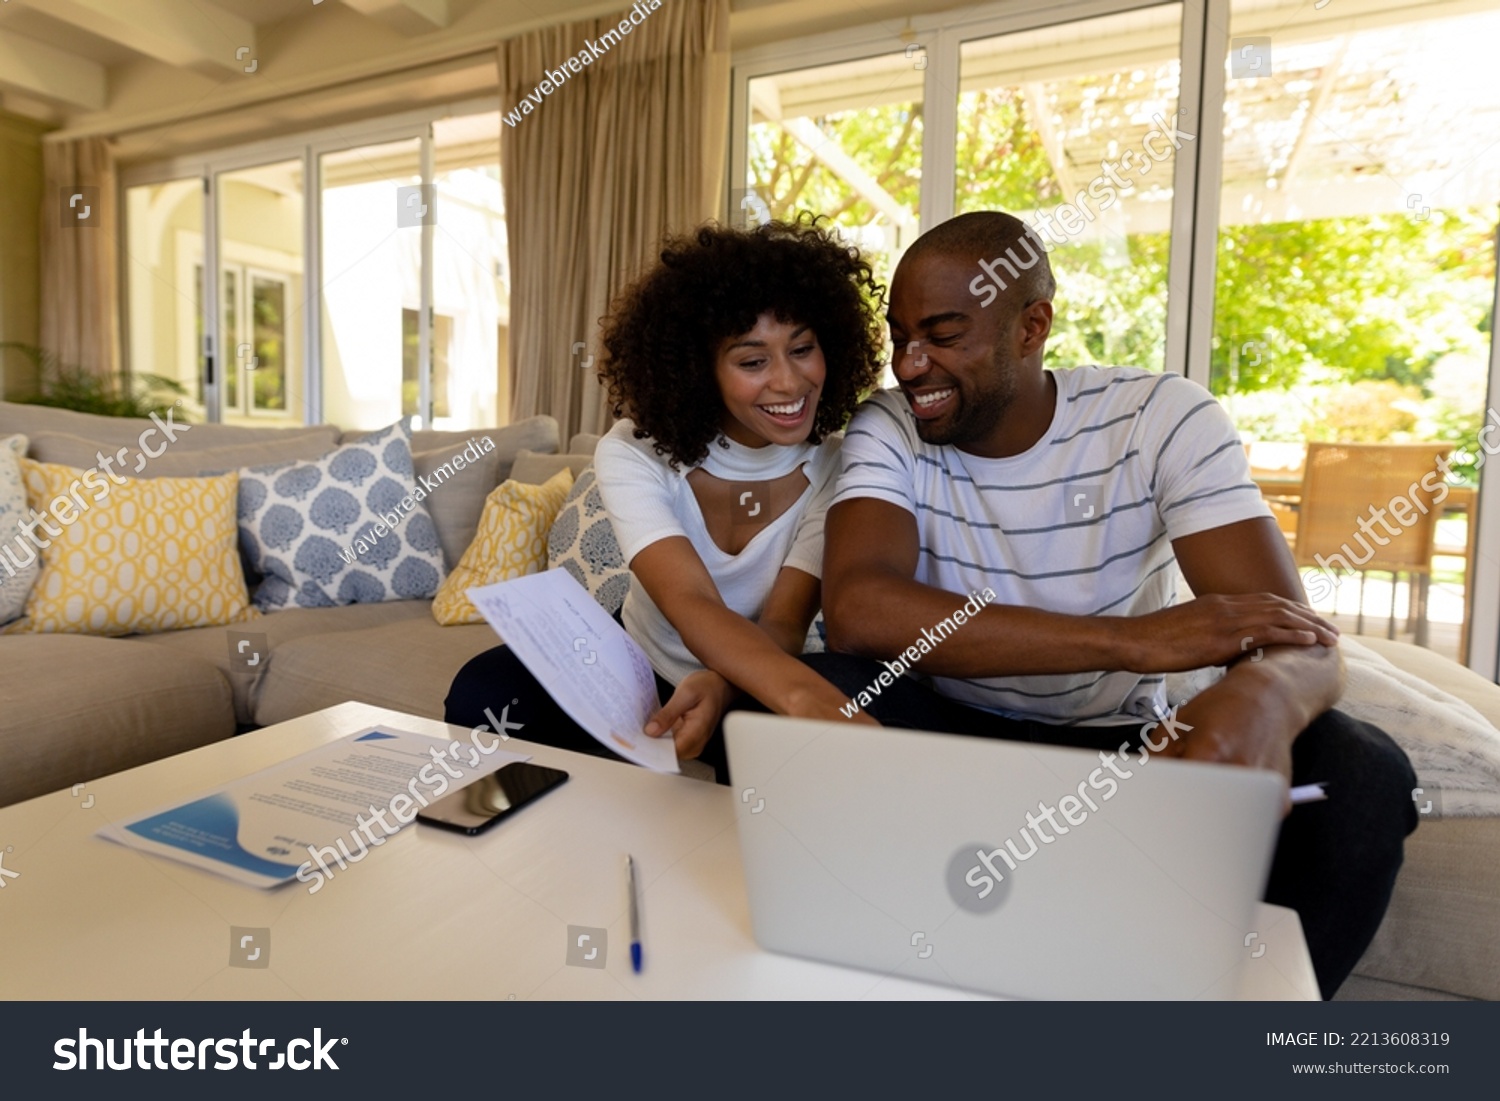 Weekend fun at home together. Front view of a mixed race couple sitting in their living room, using a laptop computer together and smiling  #2213608319